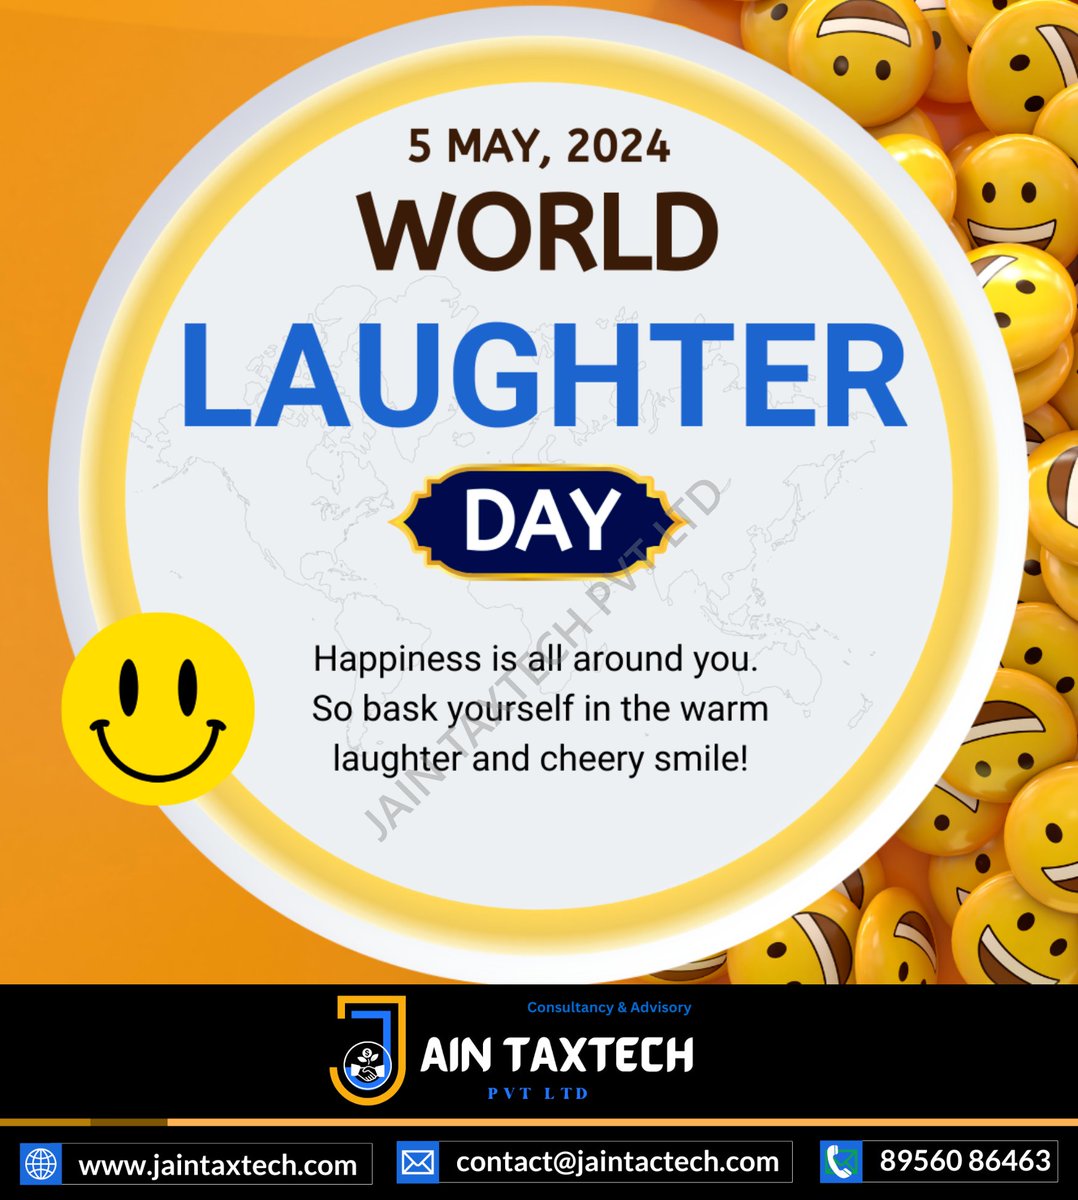 Laugh Out Loud: Celebrating World Laughter Day! 😄🌍 Spread Joy, Positivity, and Laughter Everywhere. Jain TaxTech Wishes You a Day Filled with Smiles!🎉😄 #WorldLaughterDay #SpreadJoy #JainTaxTech #TaxAdvisors #Bookkeeping #Auditing #BusinessTax #TaxSolutions #CPAfirm #GSTFiling